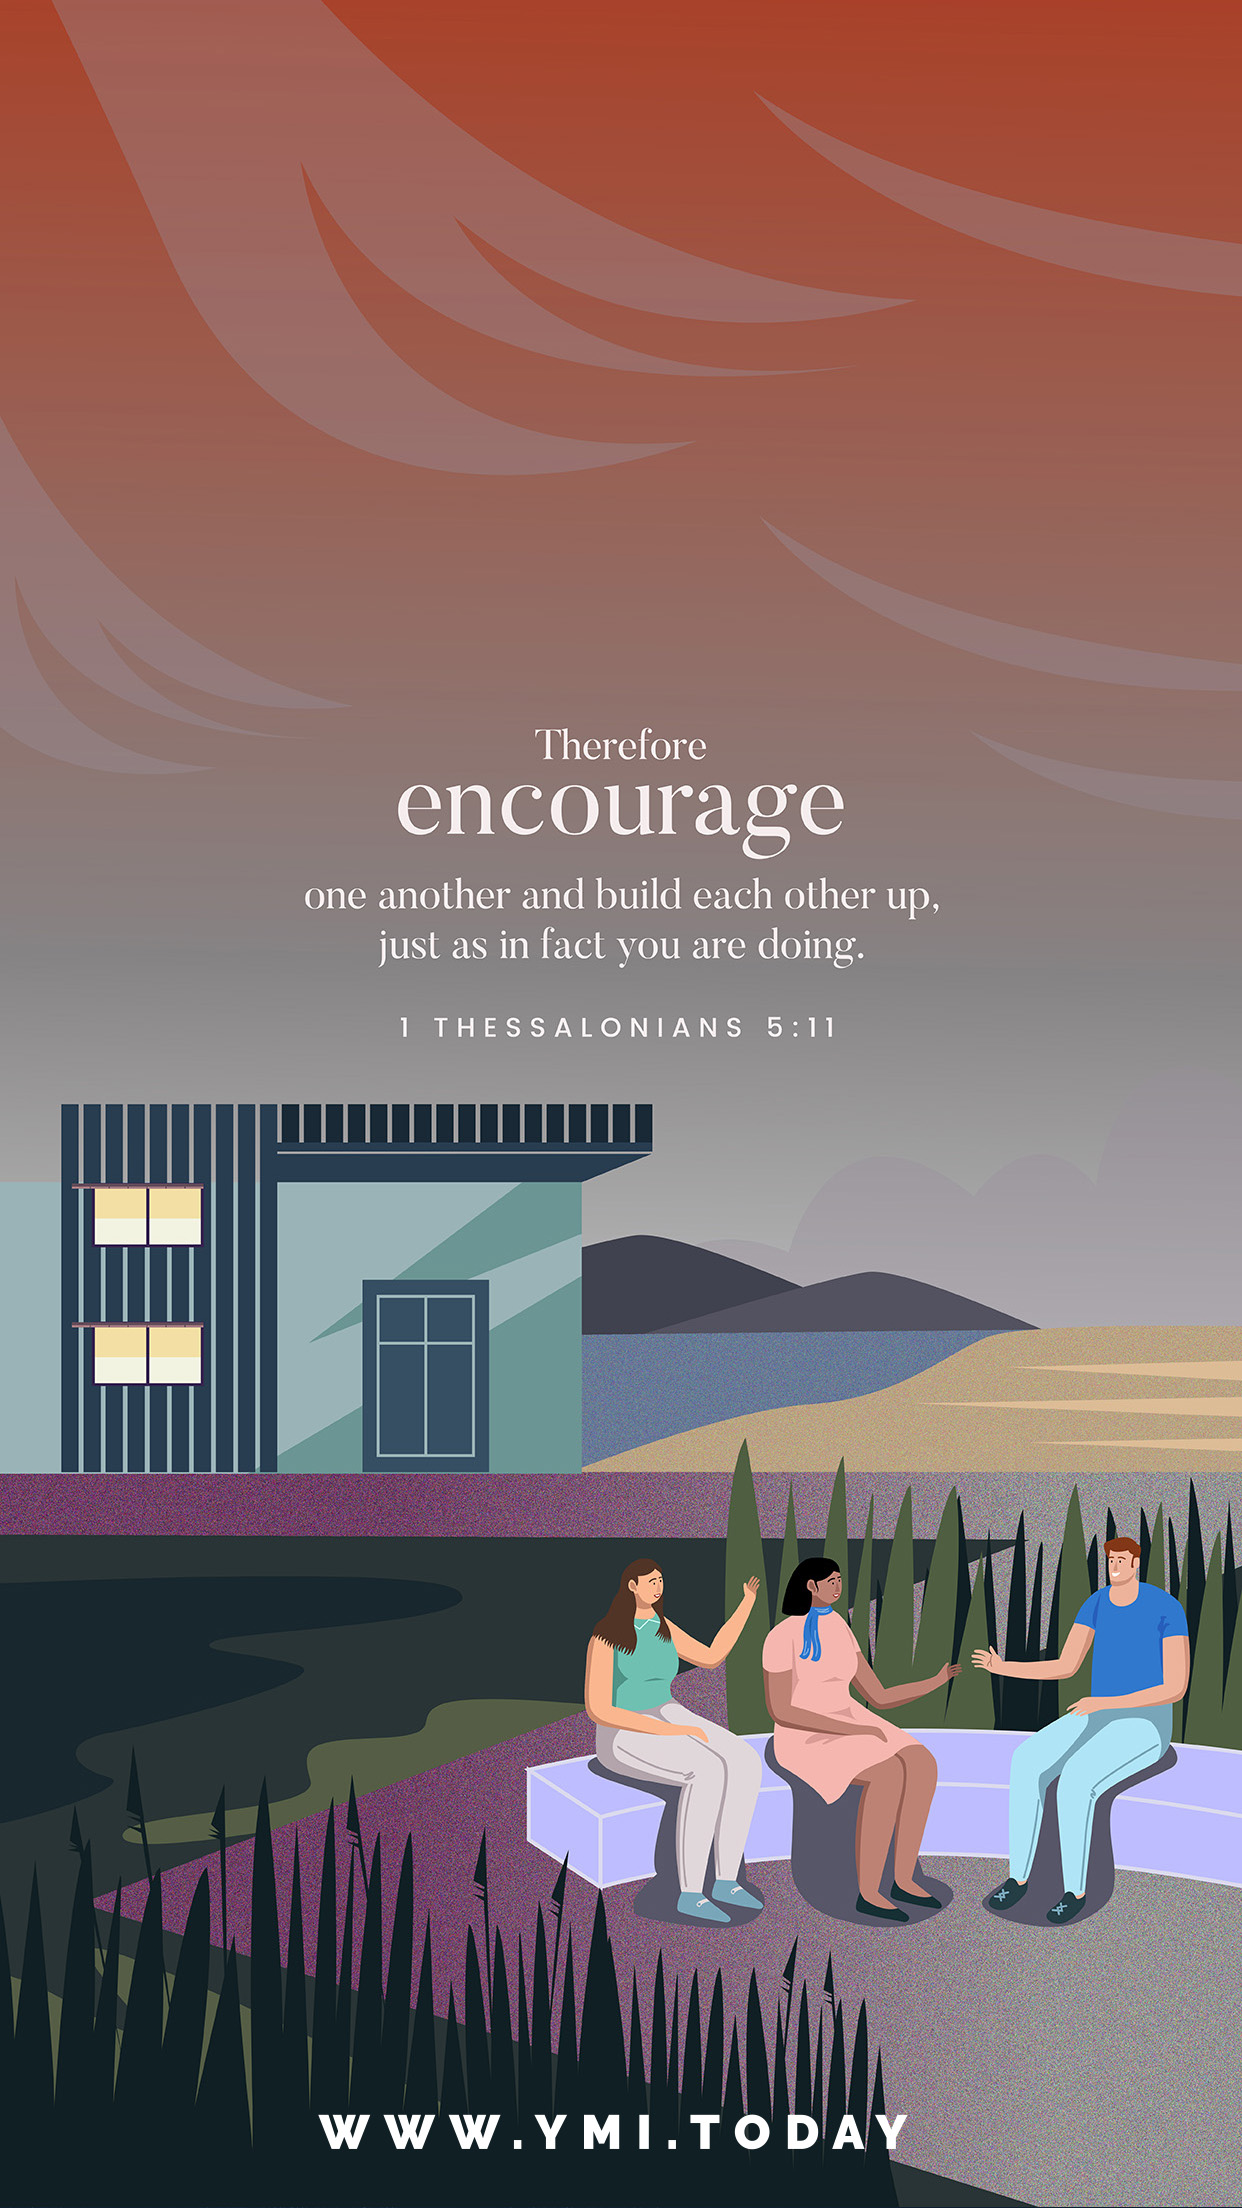 YMI February 2018 Phone Lockscreen - Therefore encourage one another and build each other up, just as in fact you are doing. - 1 Thessalonians 5:11